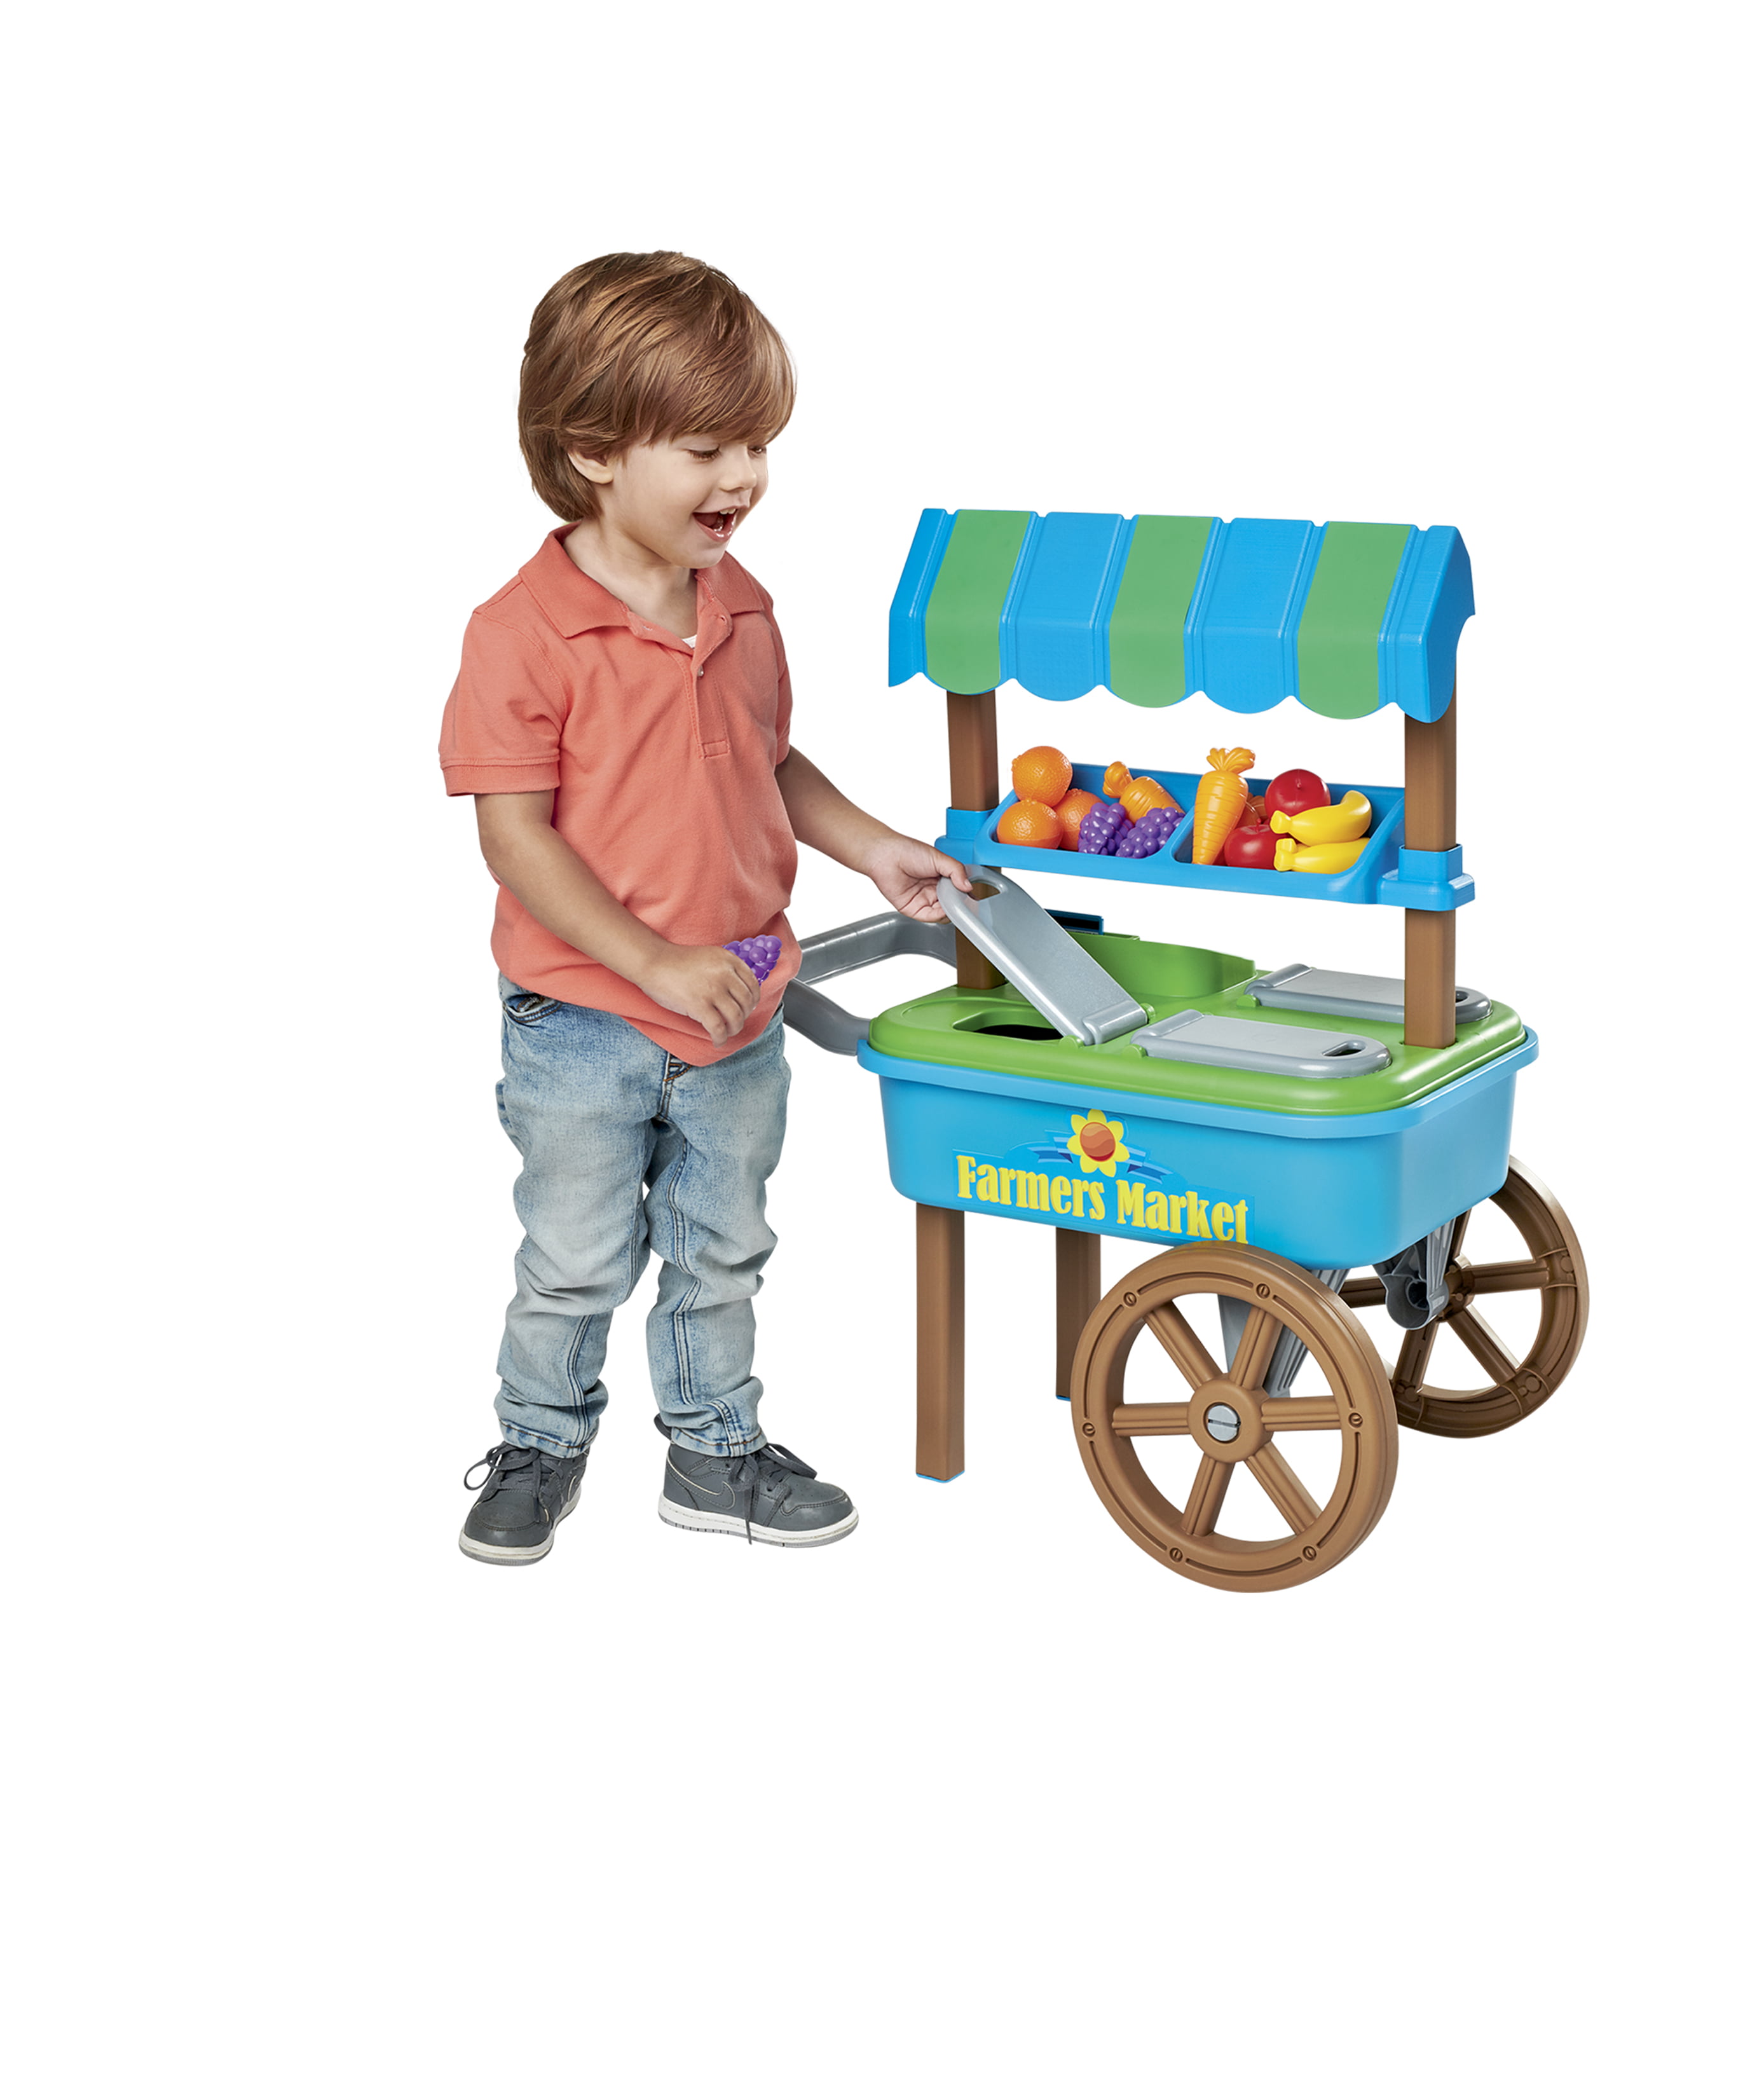 Details about   Play & Pretend Ice Cream Trolley Stand 20 Piece Imaginative Toy Playset 